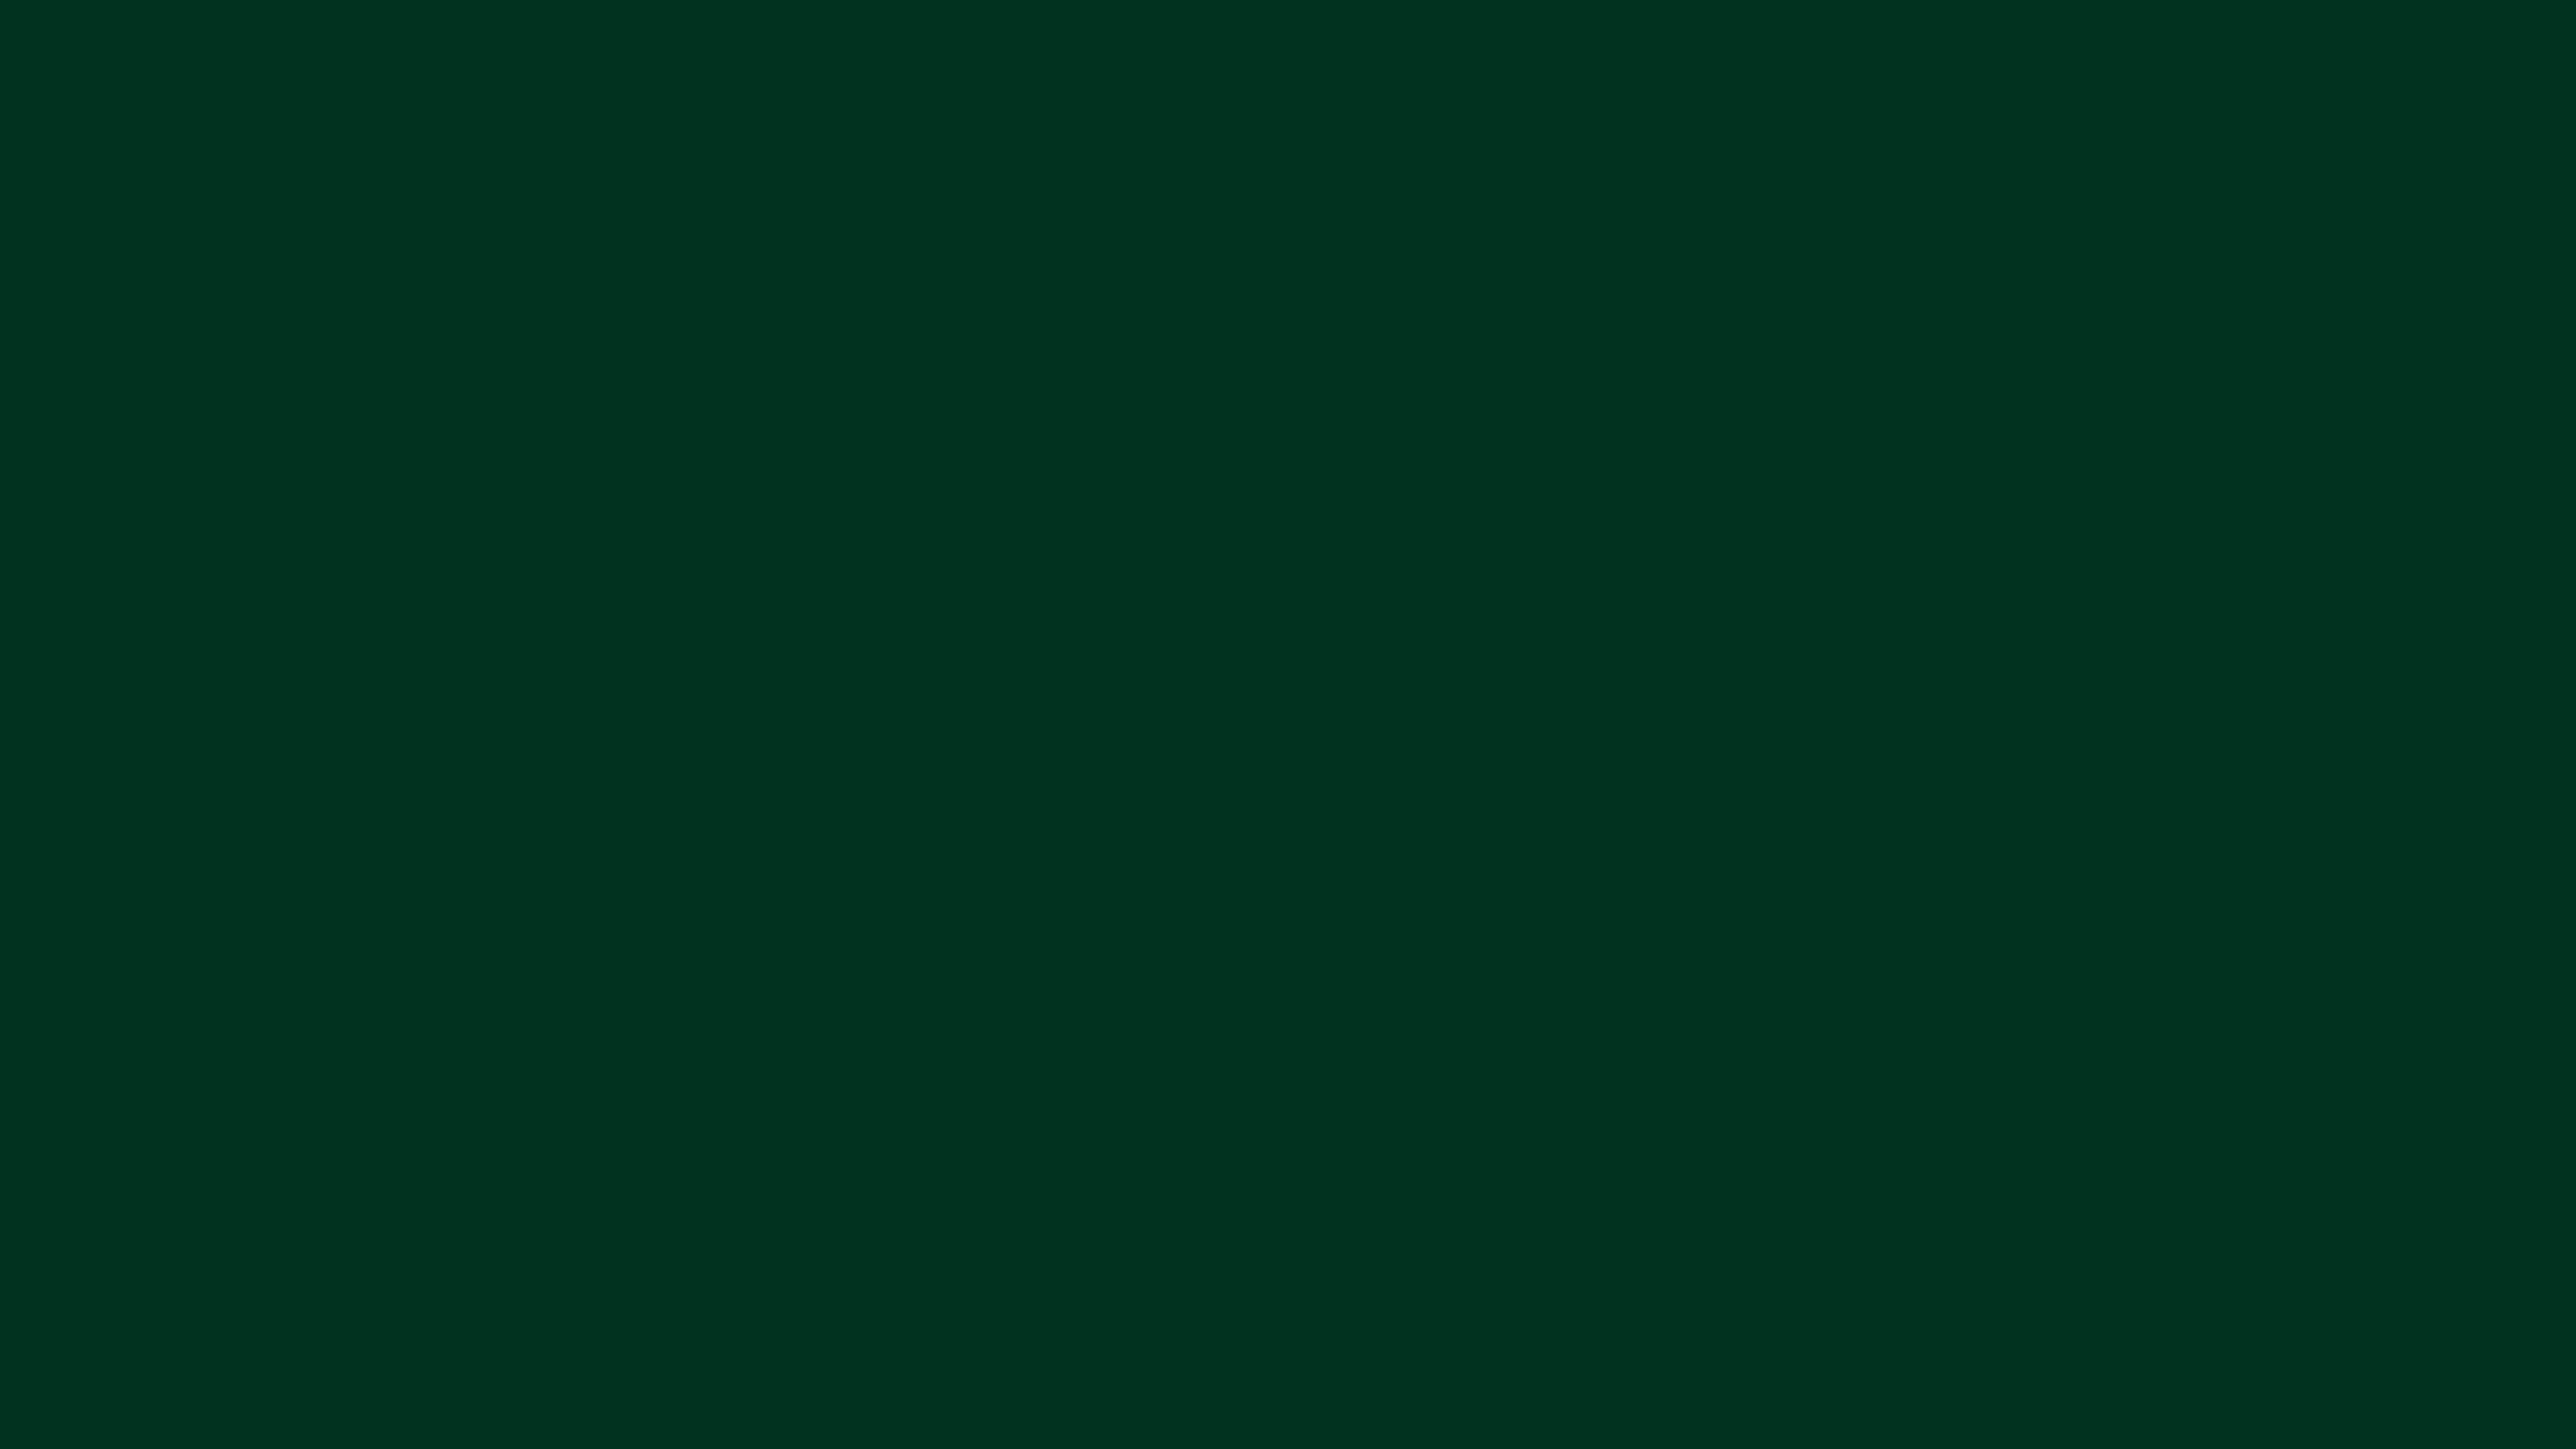 7680x4320 Dark Green Solid Color Background